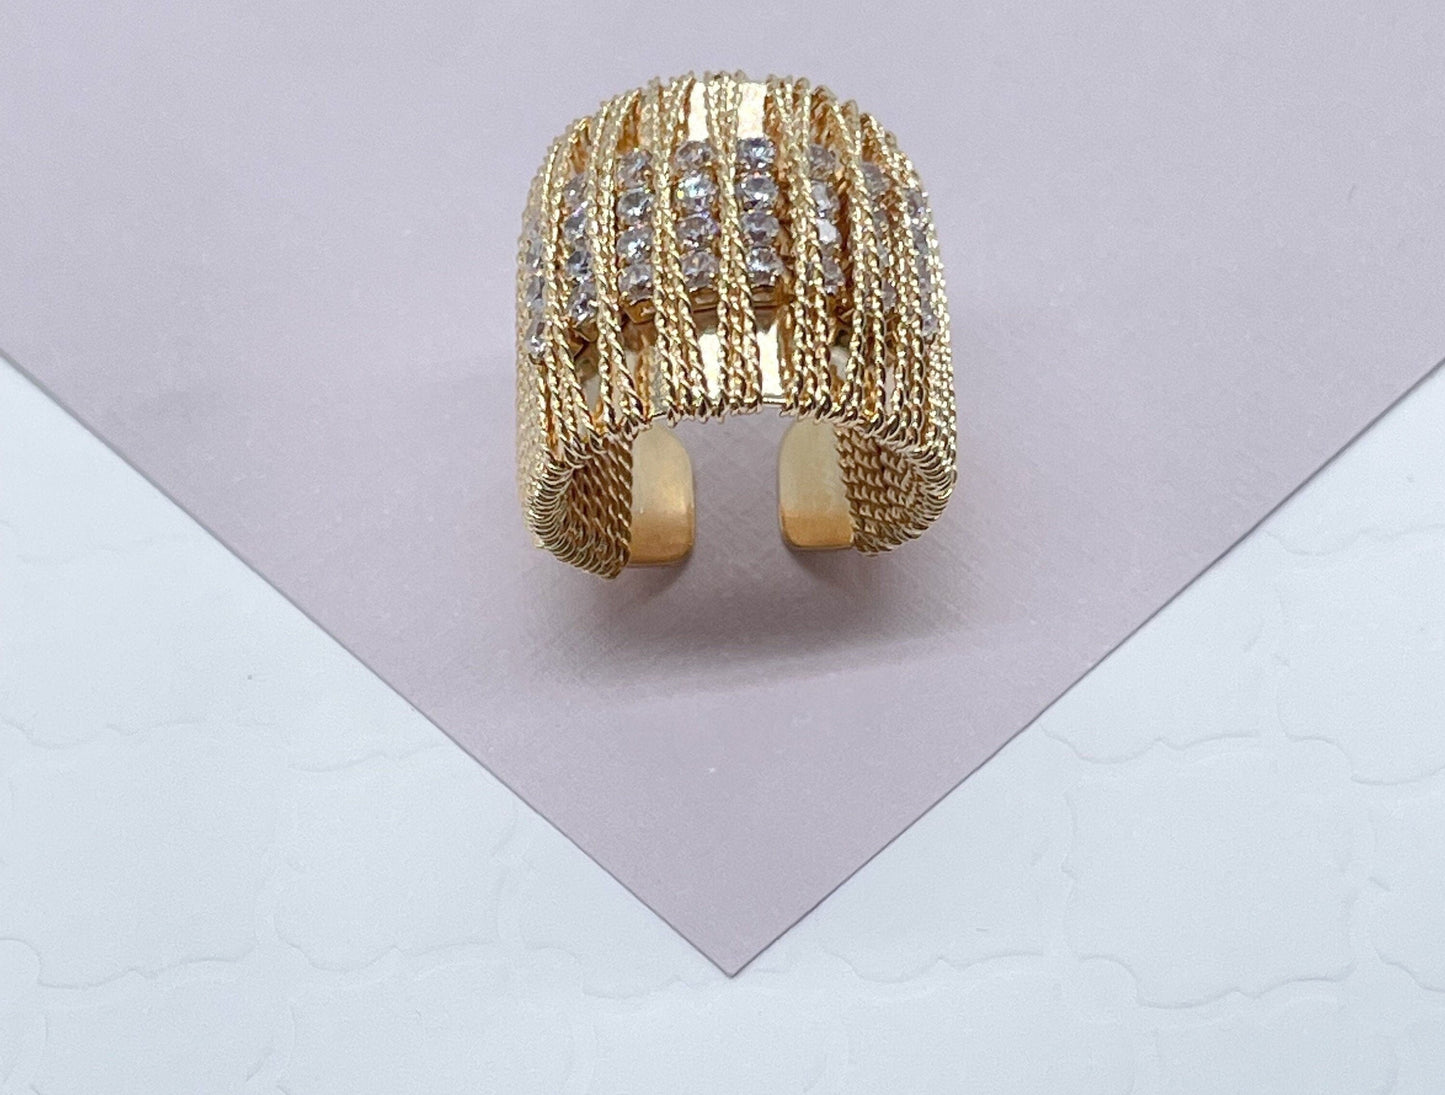 18k Gold Layered Chunky Gold Ring Wrapped In Gold Thread With 8 Rows of Cubic